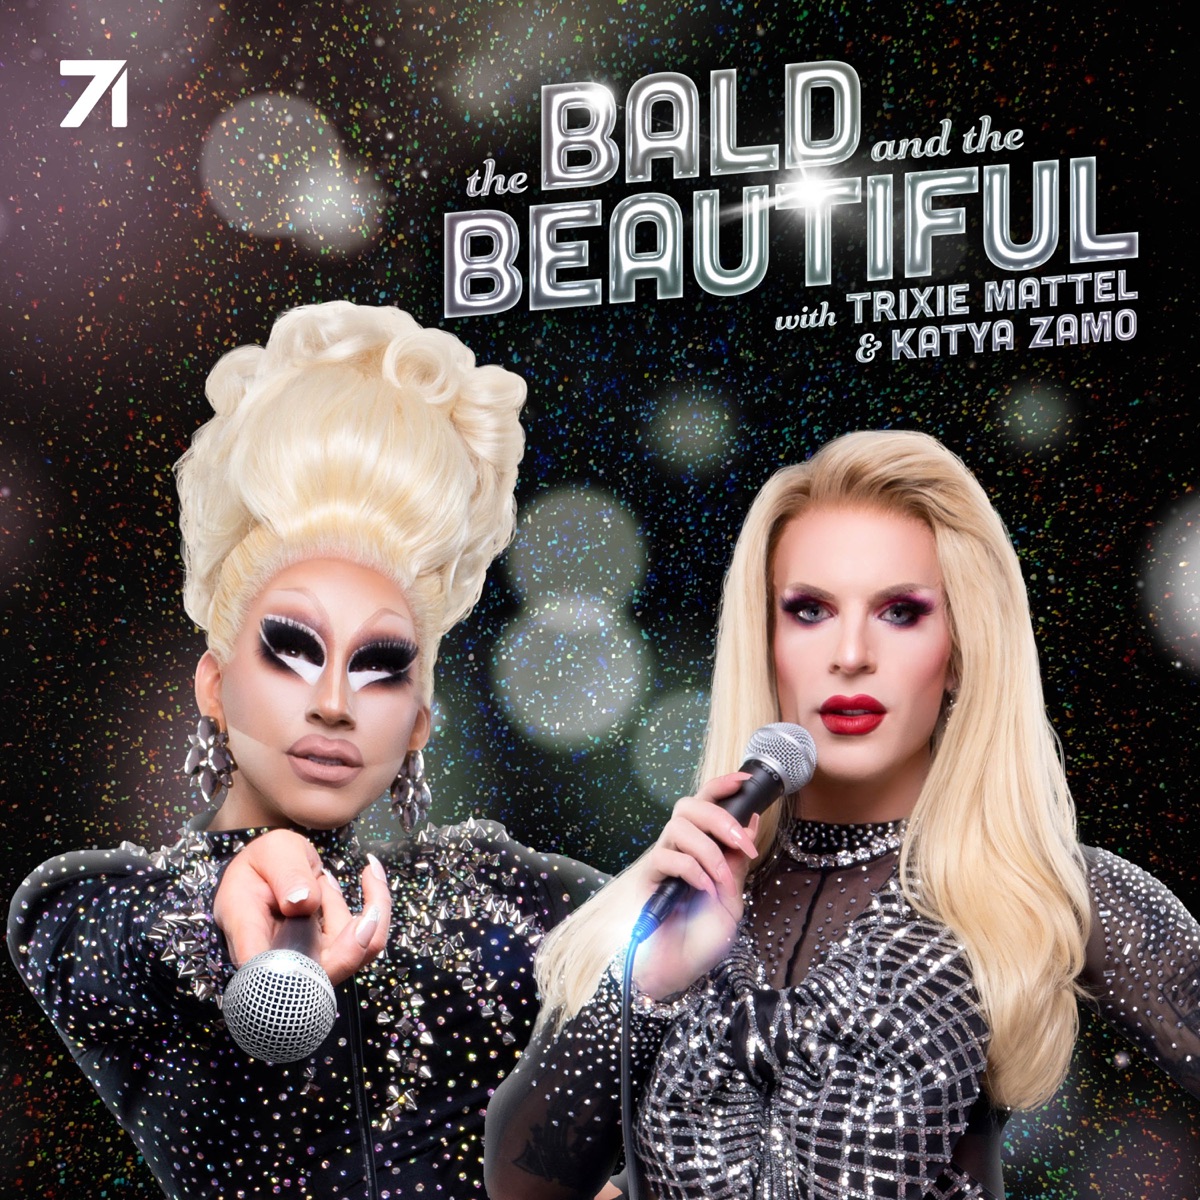 Summer Solstice Nude Beach - The Bald and the Beautiful with Trixie Mattel and Katya Zamo â€“ Podcast â€“  Podtail